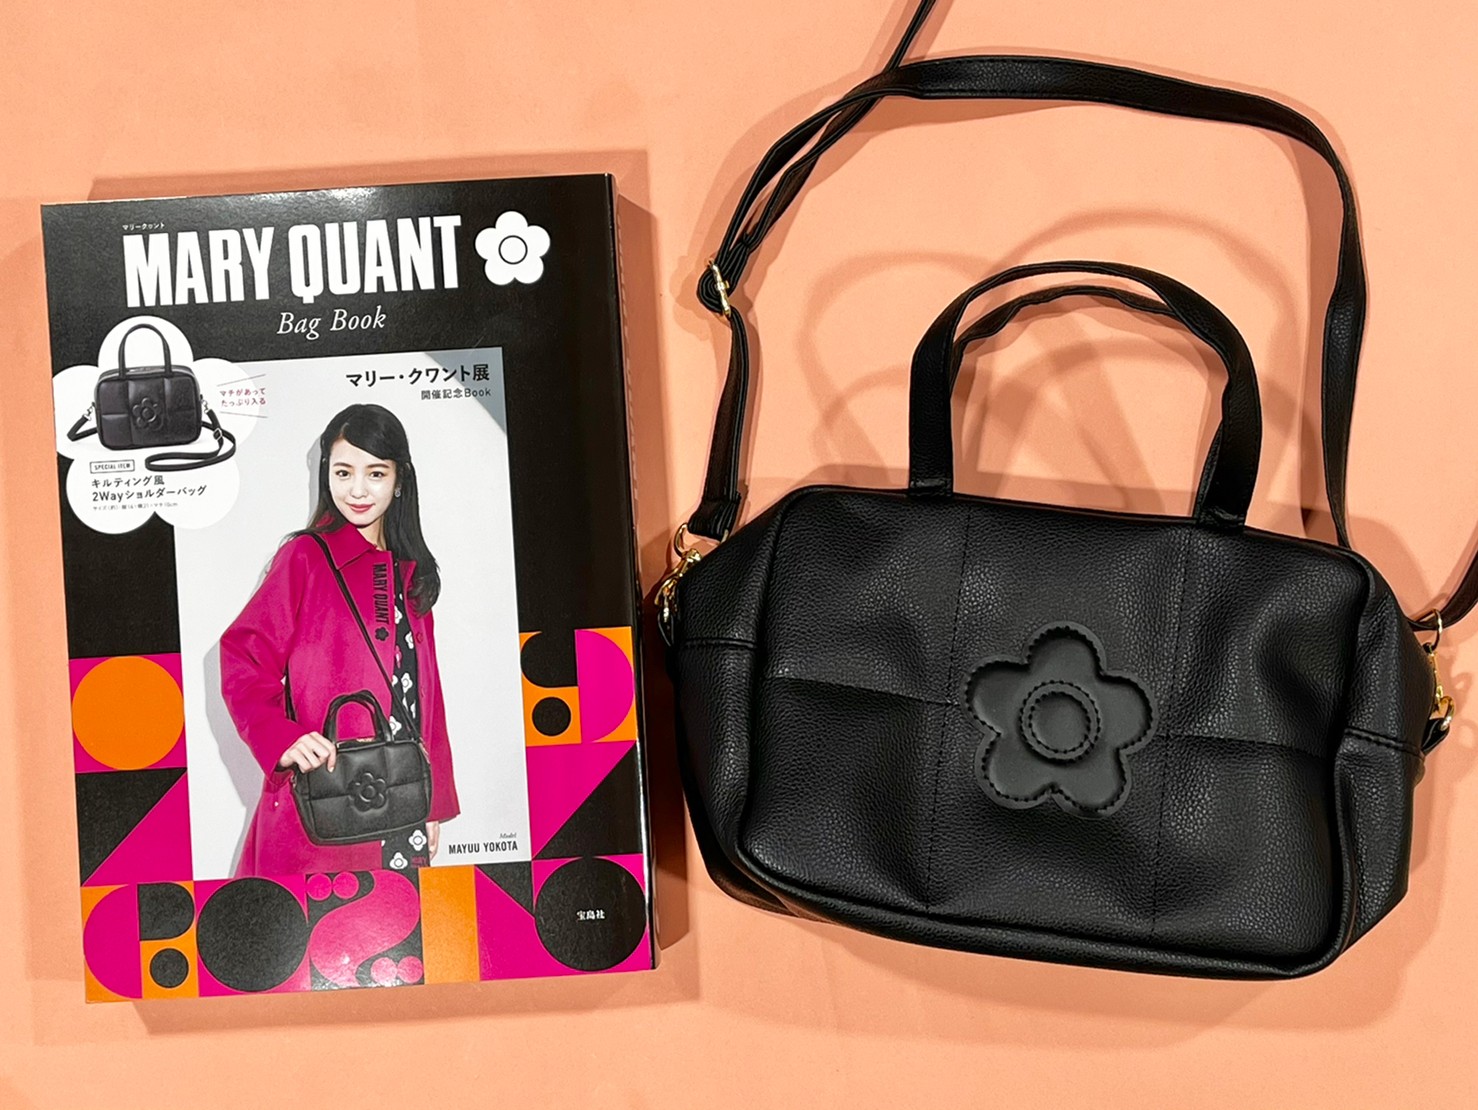 MARY QUANT Bag Bookと付録のバッグ